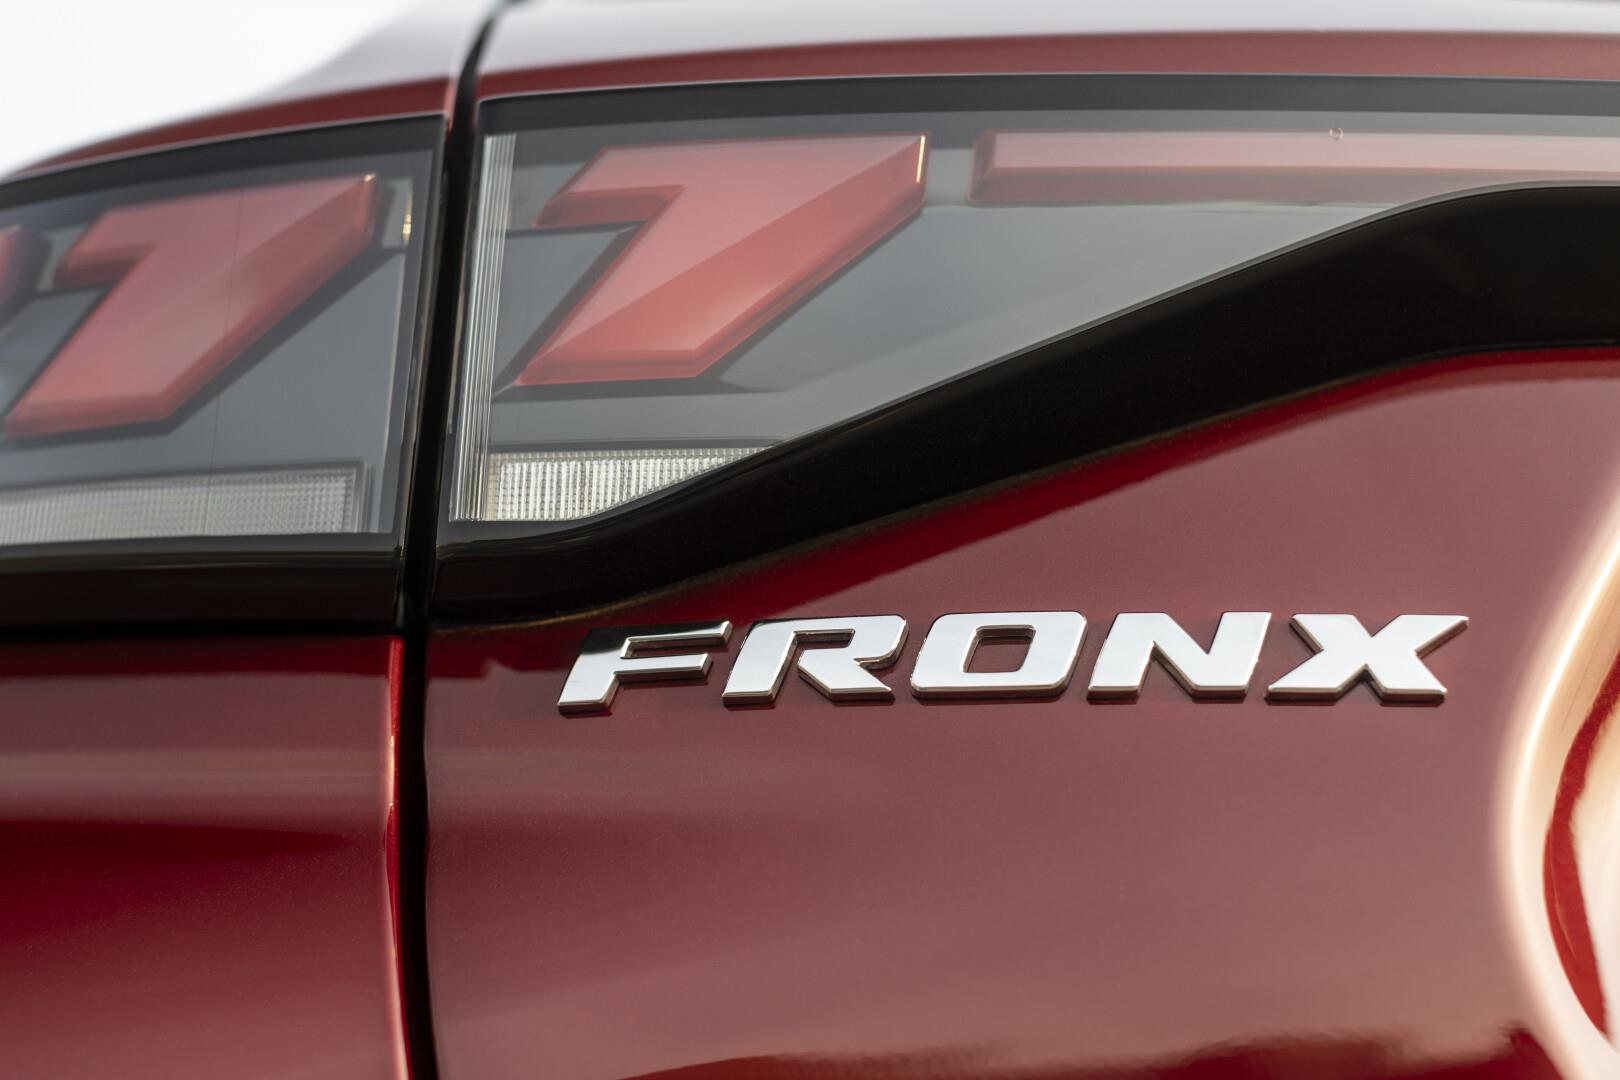 is the suzuki fronx good for long drives?